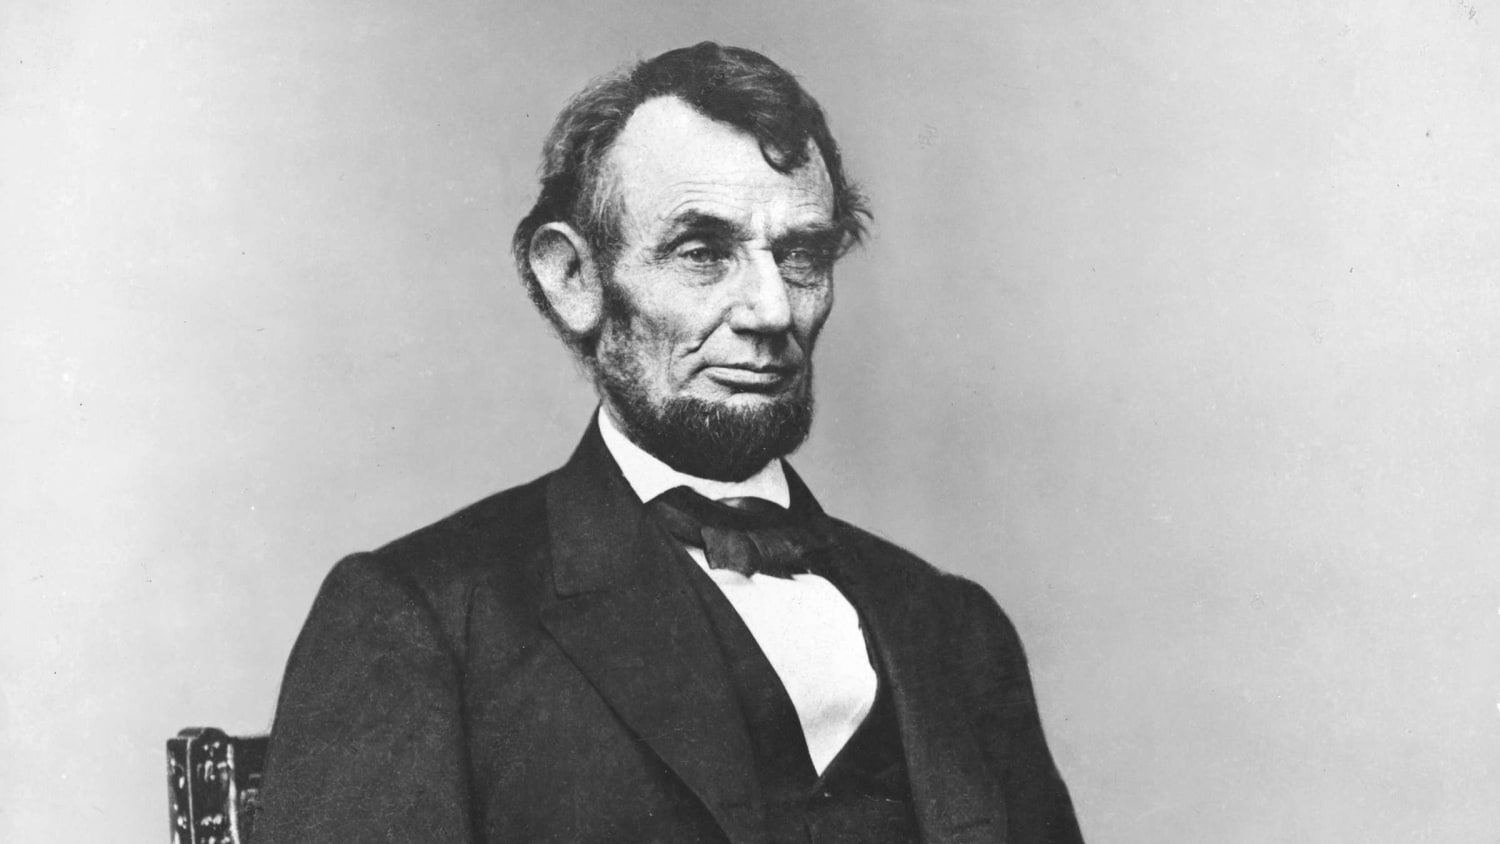 You Can Now Read Thousands of Abraham Lincoln's Personal Letters Online